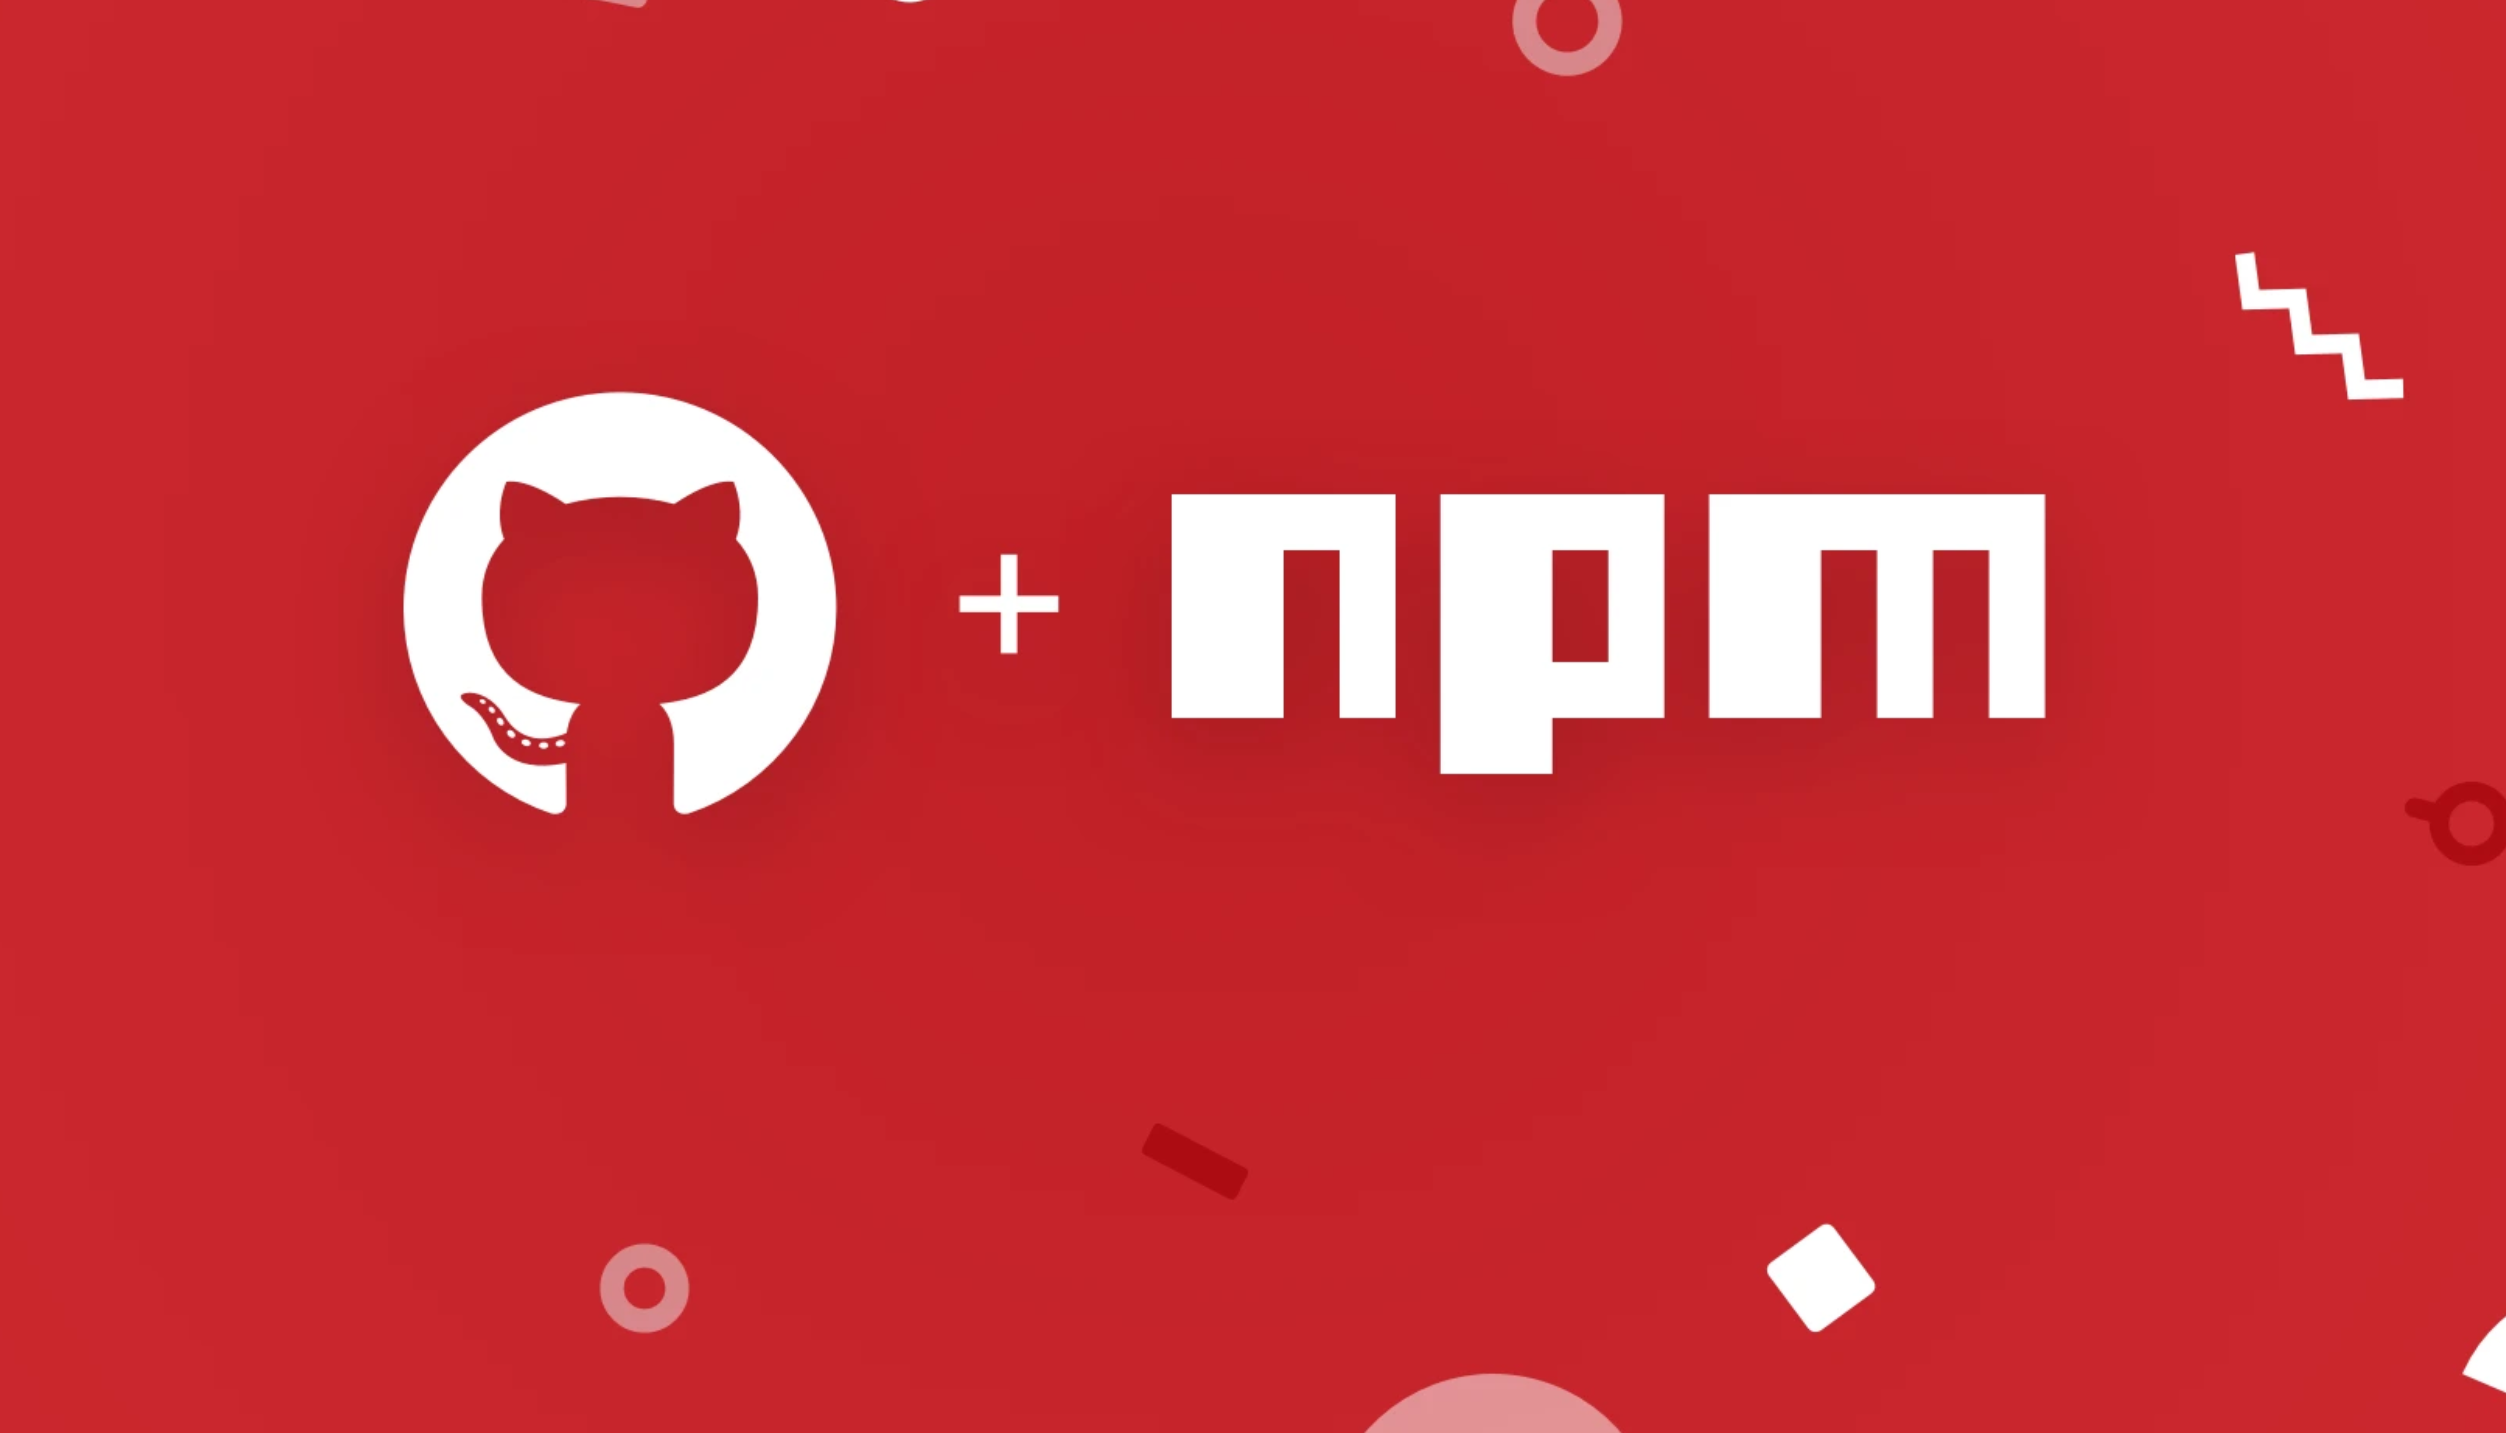 Microsoft's GitHub to acquire JavaScript package manager npm - OnMSFT.com - March 16, 2020